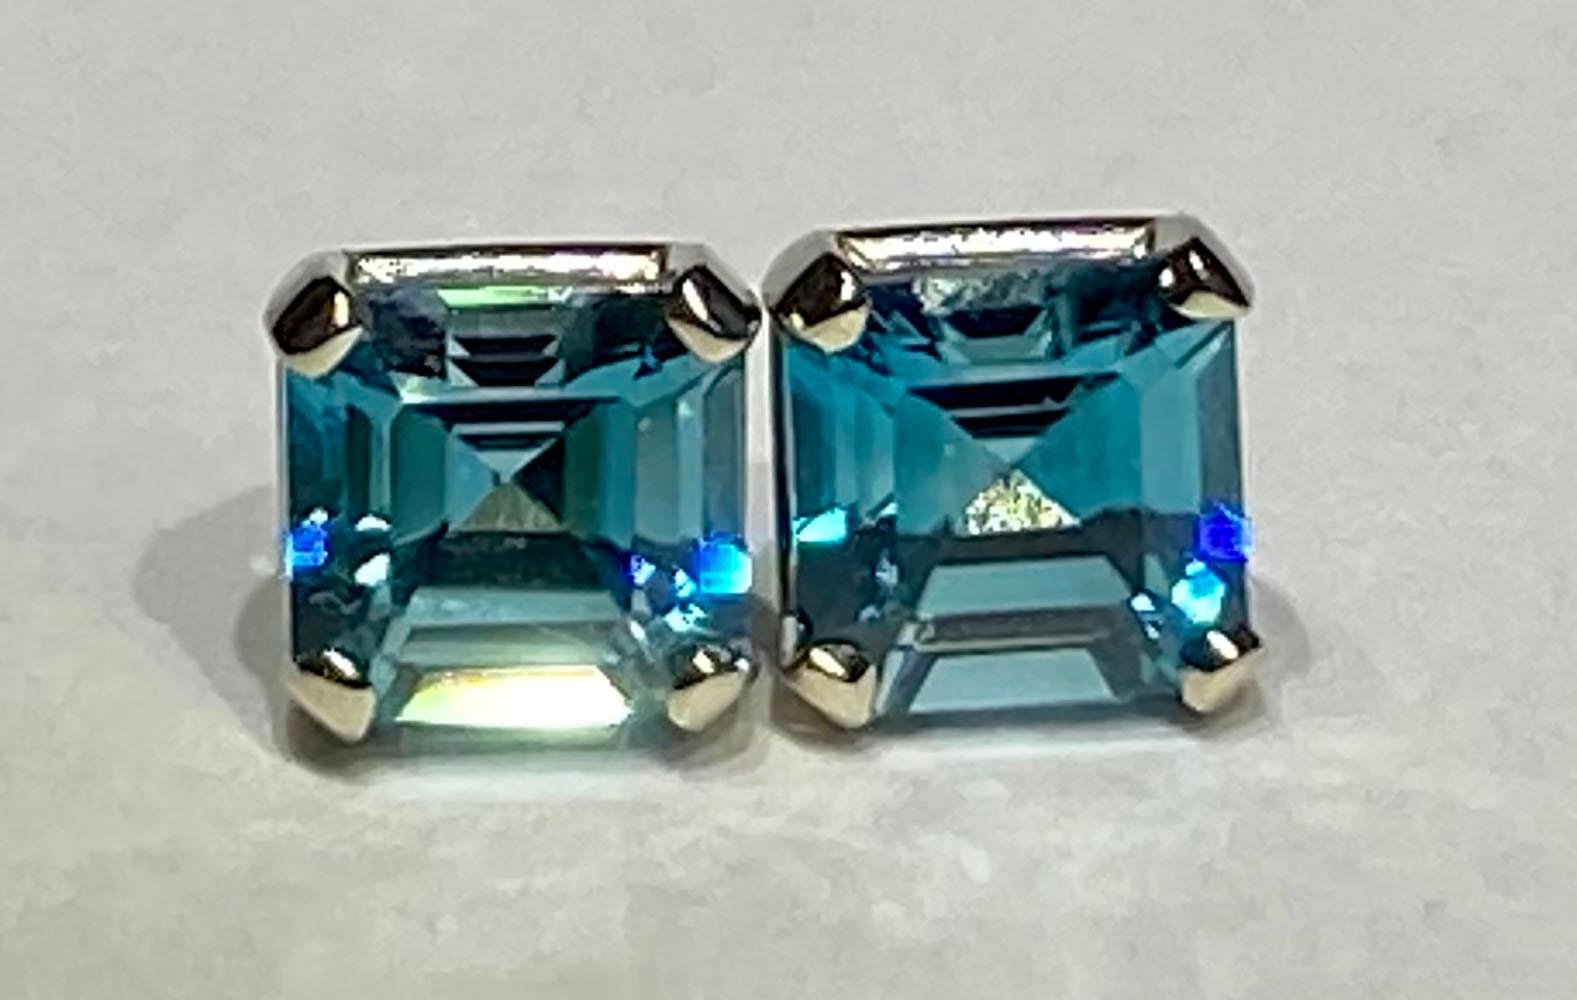 Kary Adam Designed, Octagon cut Blue Zircon Earrings in 14kt White Gold. Blue Zircons are cut in octagon style and weigh 2.13 Carats together. These are set in 14Kt White Gold. 

Originally from San Diego, California, Kary Adam lived in the “Gem